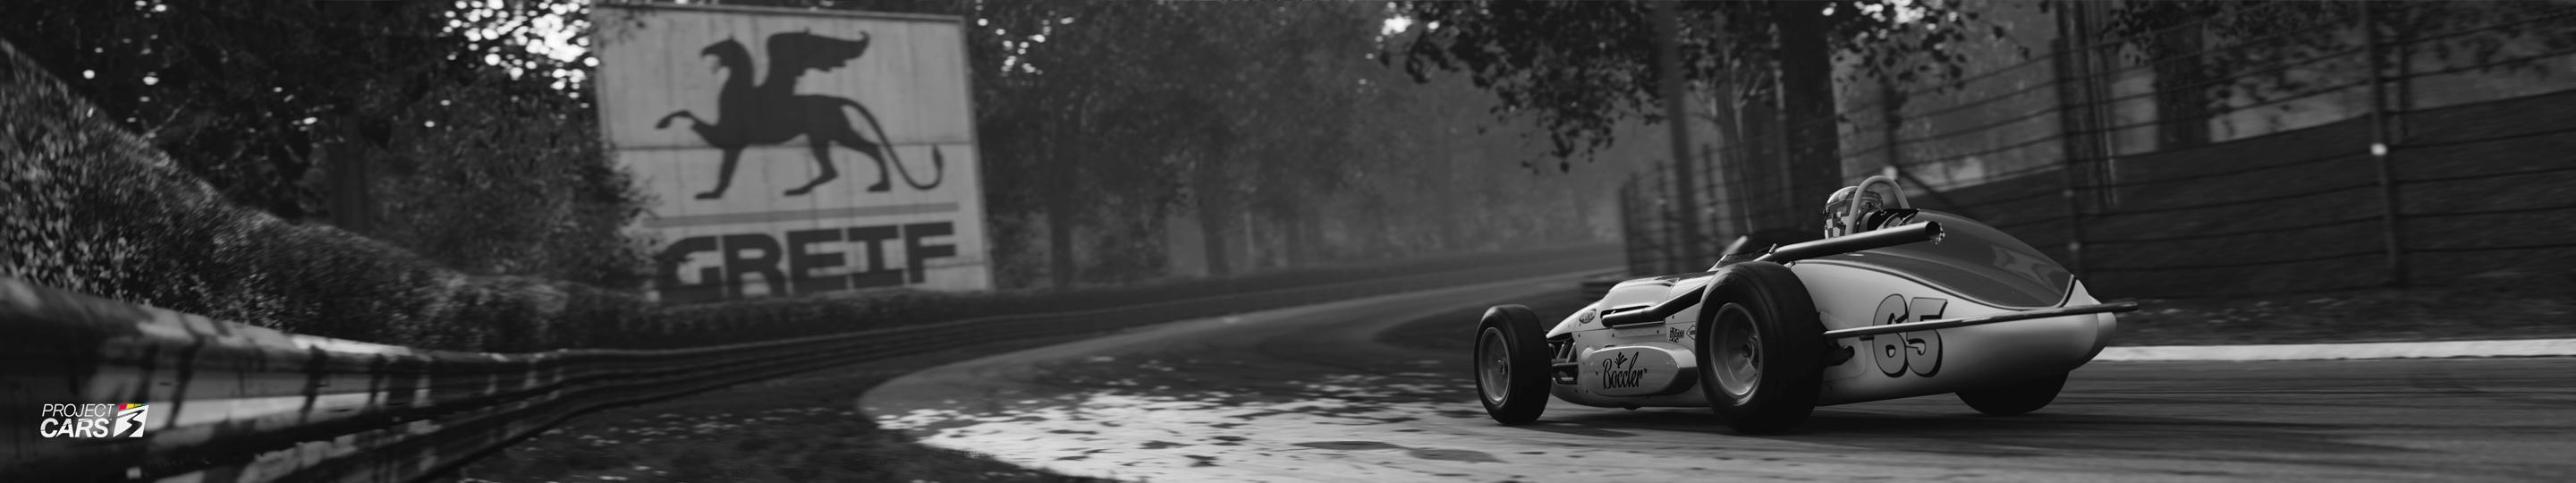 1 PROJECT CARS 3 WATSON ROADSTER at MONZA HISTORIC copy.jpg